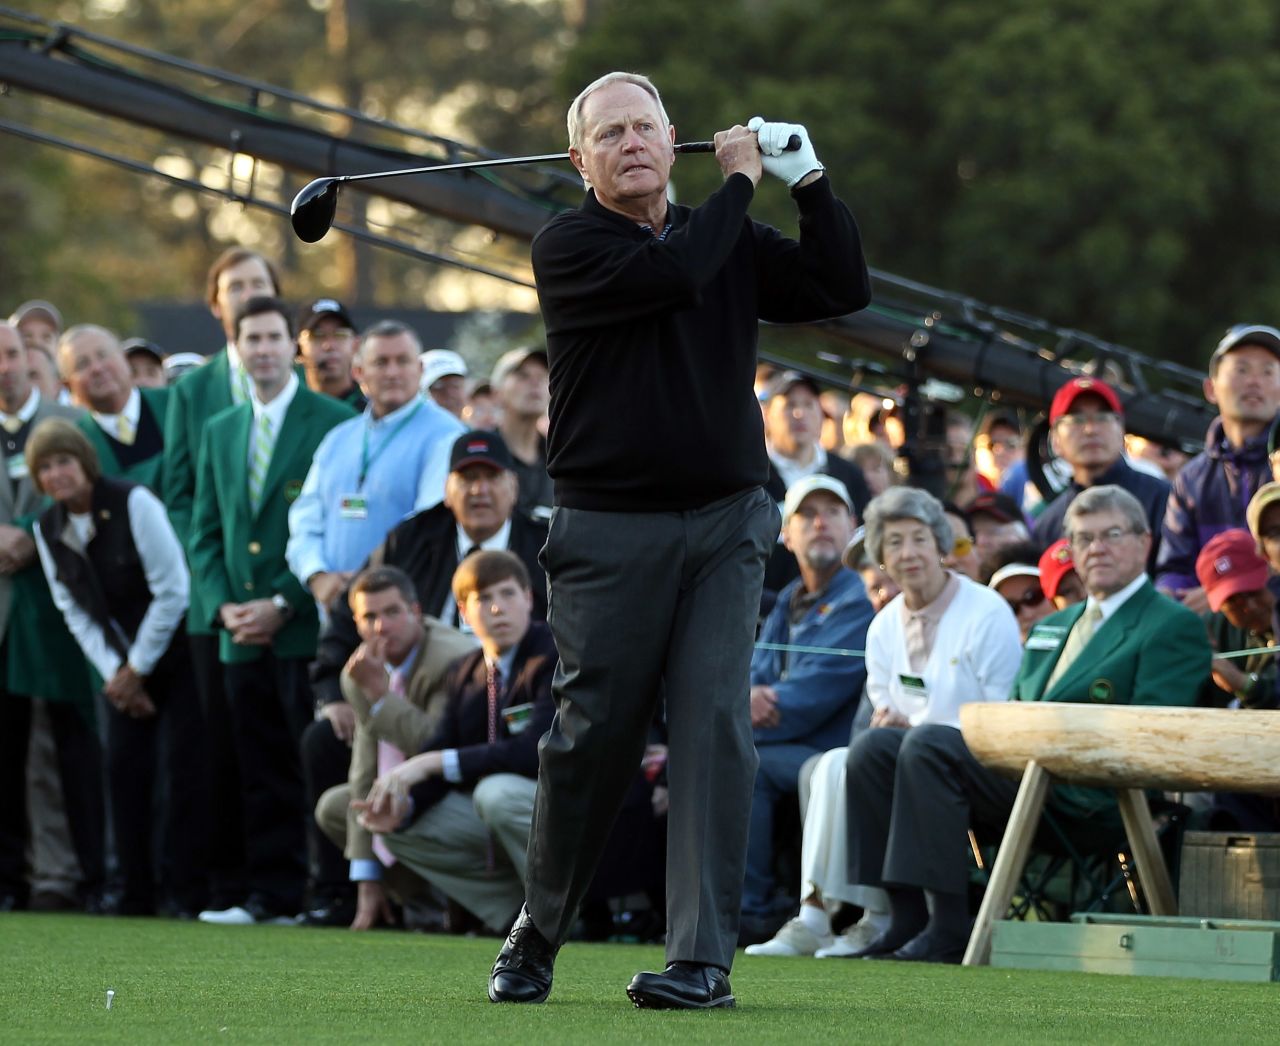 Eighteen-time major winner Jack Nicklaus is in favor of seeing a quicker and cheaper game of golf introduced. "I'd quite like to play a game that I can get some reasonable gratification out of very quickly and something that is not going to cost me an arm and a leg," Nicklaus told CNN.  